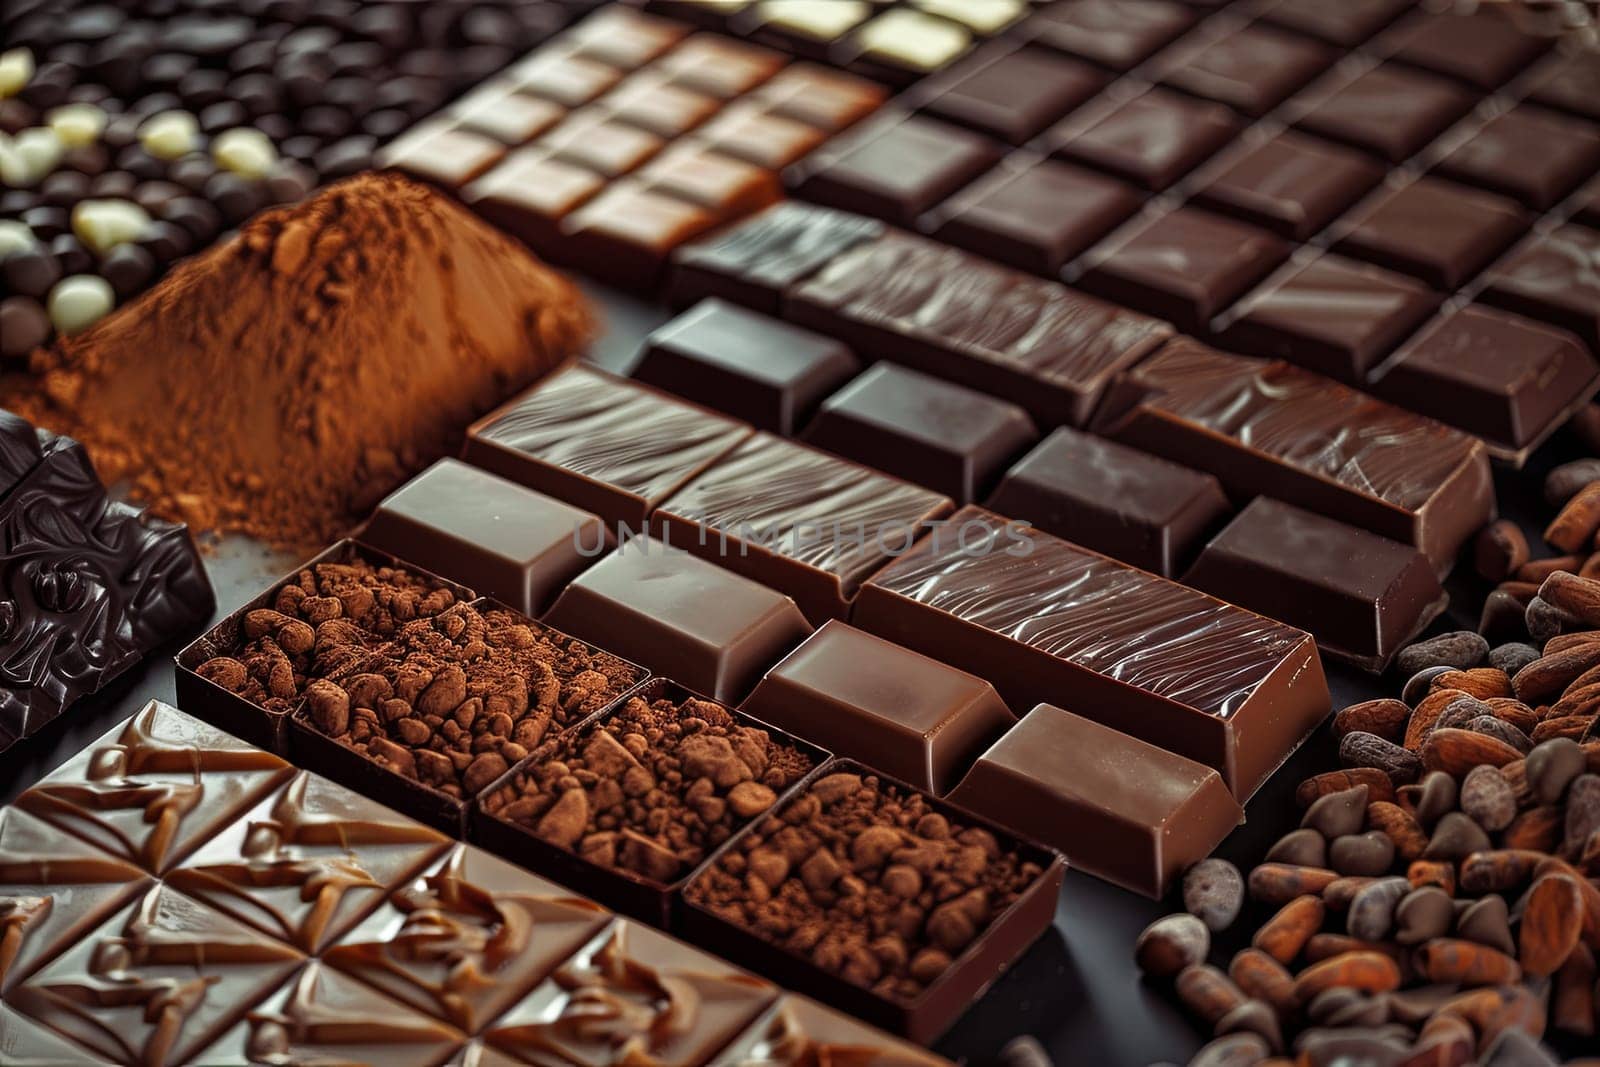 Various types of chocolate bars neatly arranged on a table, showcasing a wide range of flavors and types.